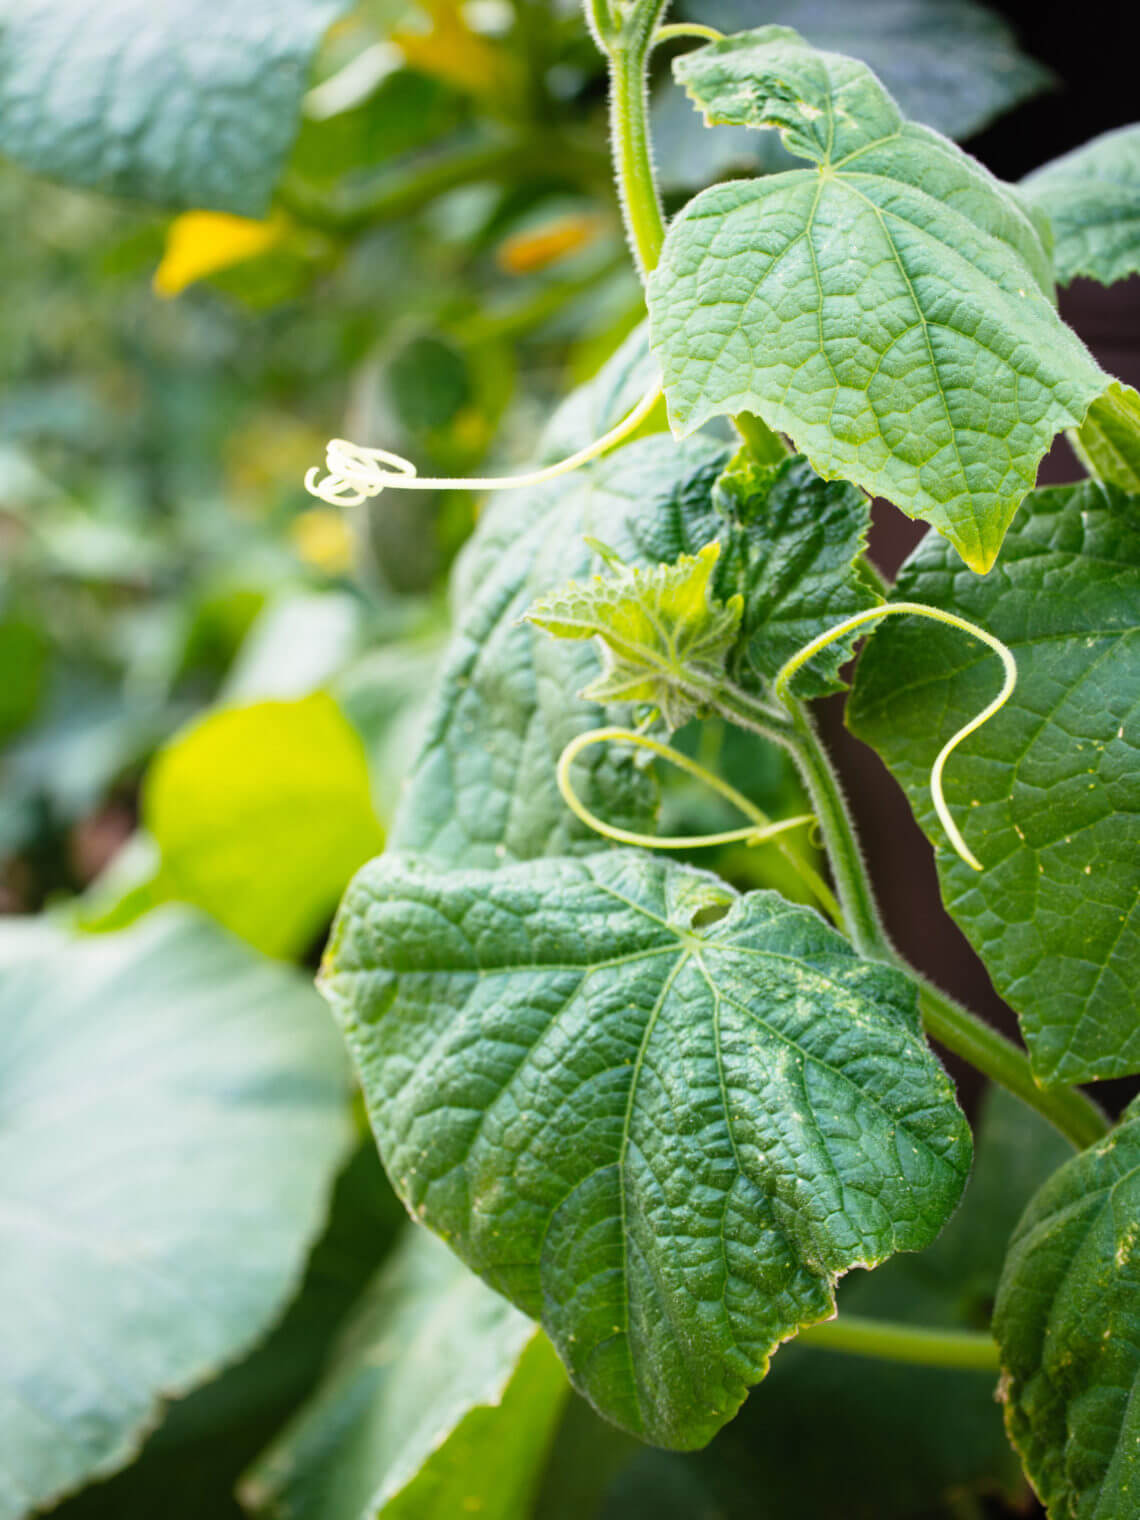 11 vegetables you grow that you didn't know you could eat